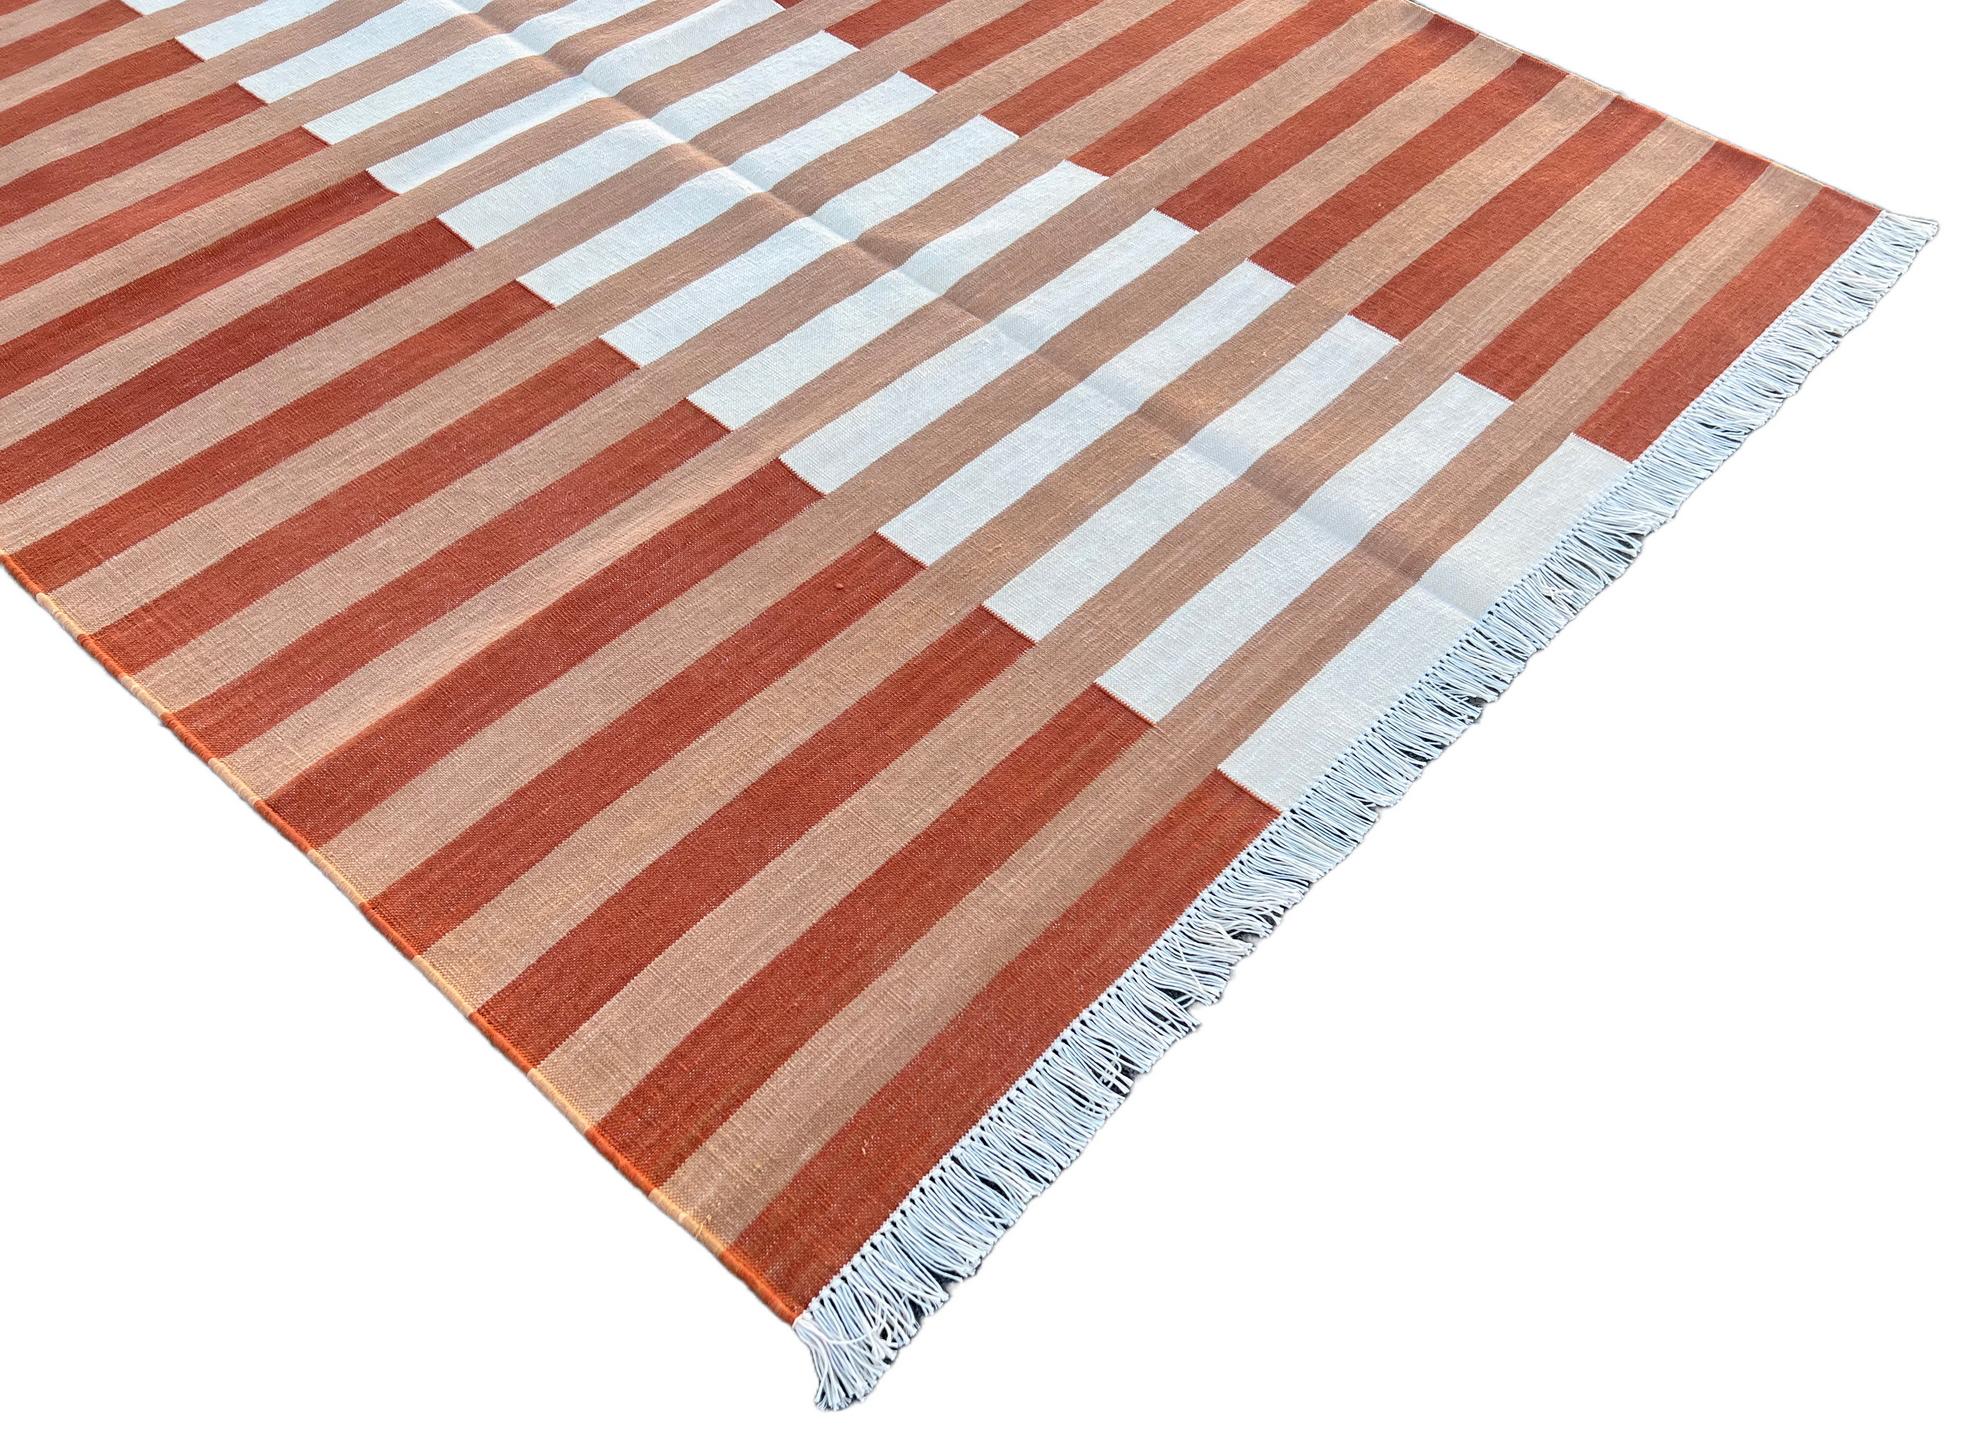 Hand-Woven Handmade Cotton Area Flat Weave Rug, 4x6 Beige And Cream Striped Indian Dhurrie For Sale